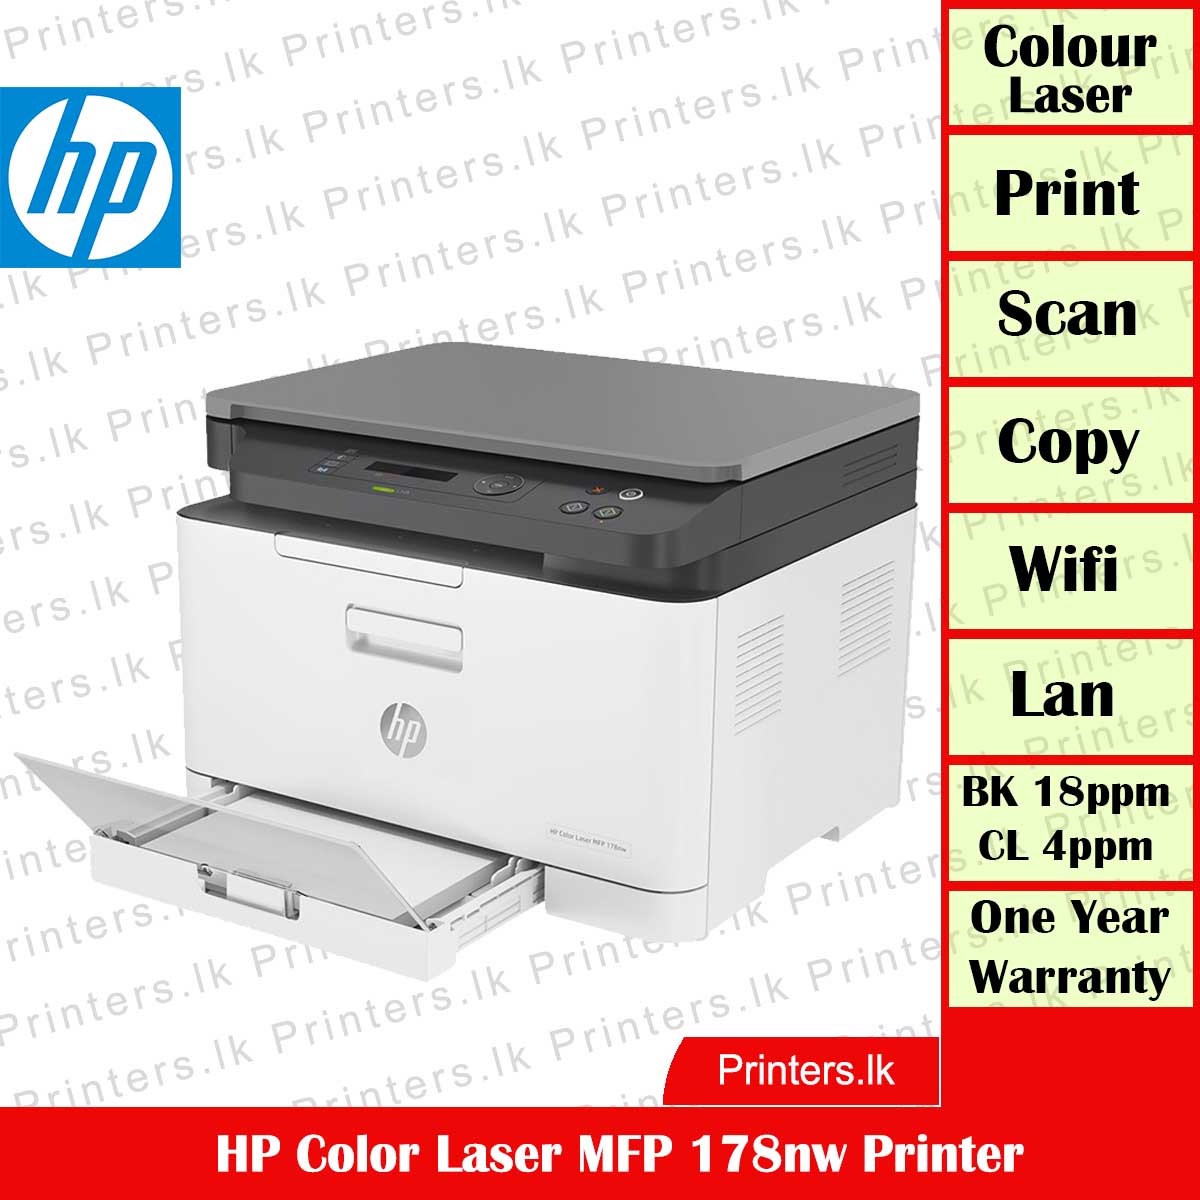 HP Color Laser MFP 178nw Wireless Printer 4ZB96A